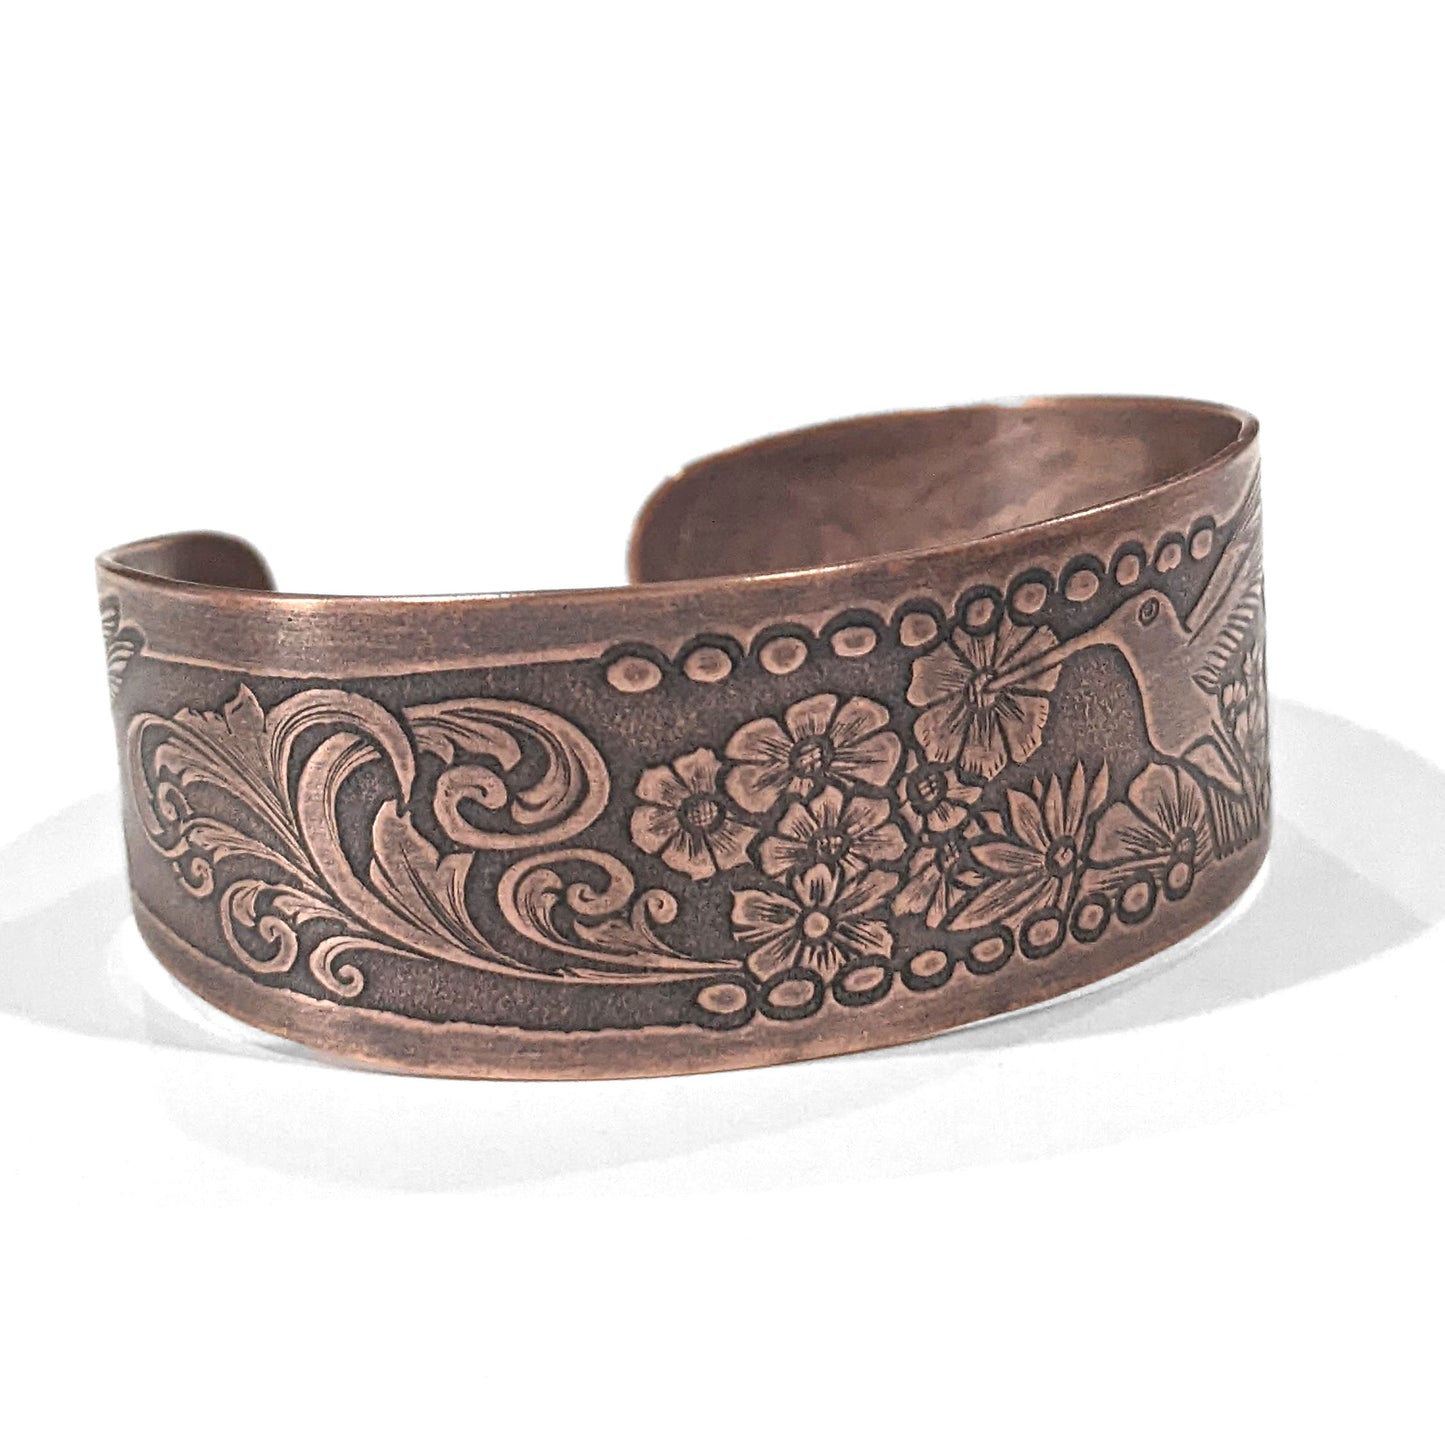 Copper cuff bracelet with hummingbirds and flowers. The main scene is a hummingbird in flight drinking nectar from one of a field of flowers. At each end of the cuff there is a smaller hummingbird drinking from a single flower. The cuff is tapered, just under and inch wide at the center tapering to one half inch at the ends.